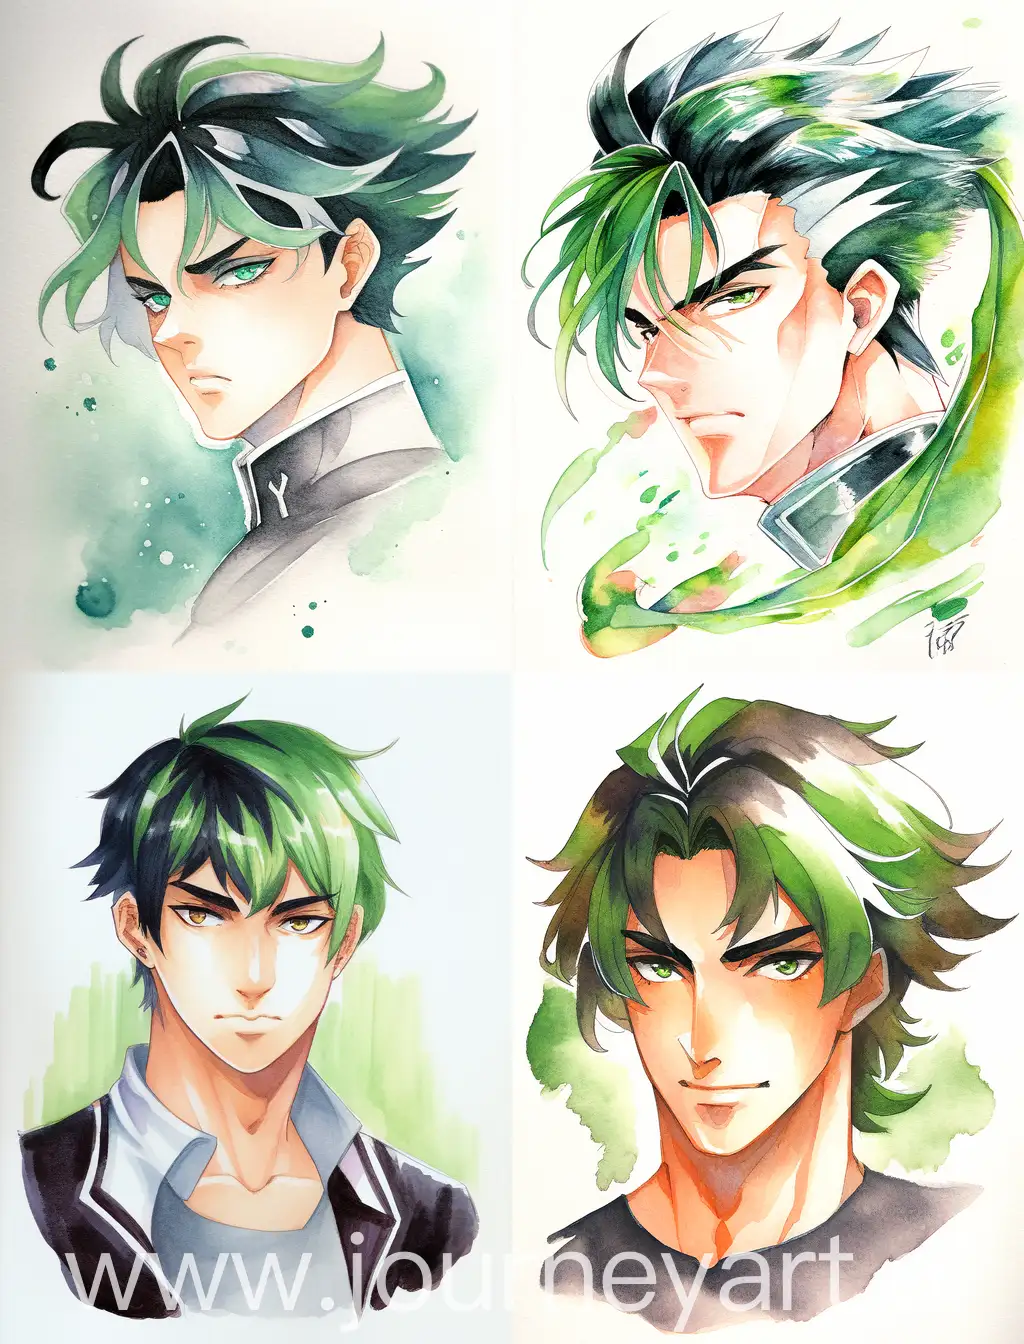 Watercolor-Portrait-of-a-Male-with-Black-and-Green-Hair